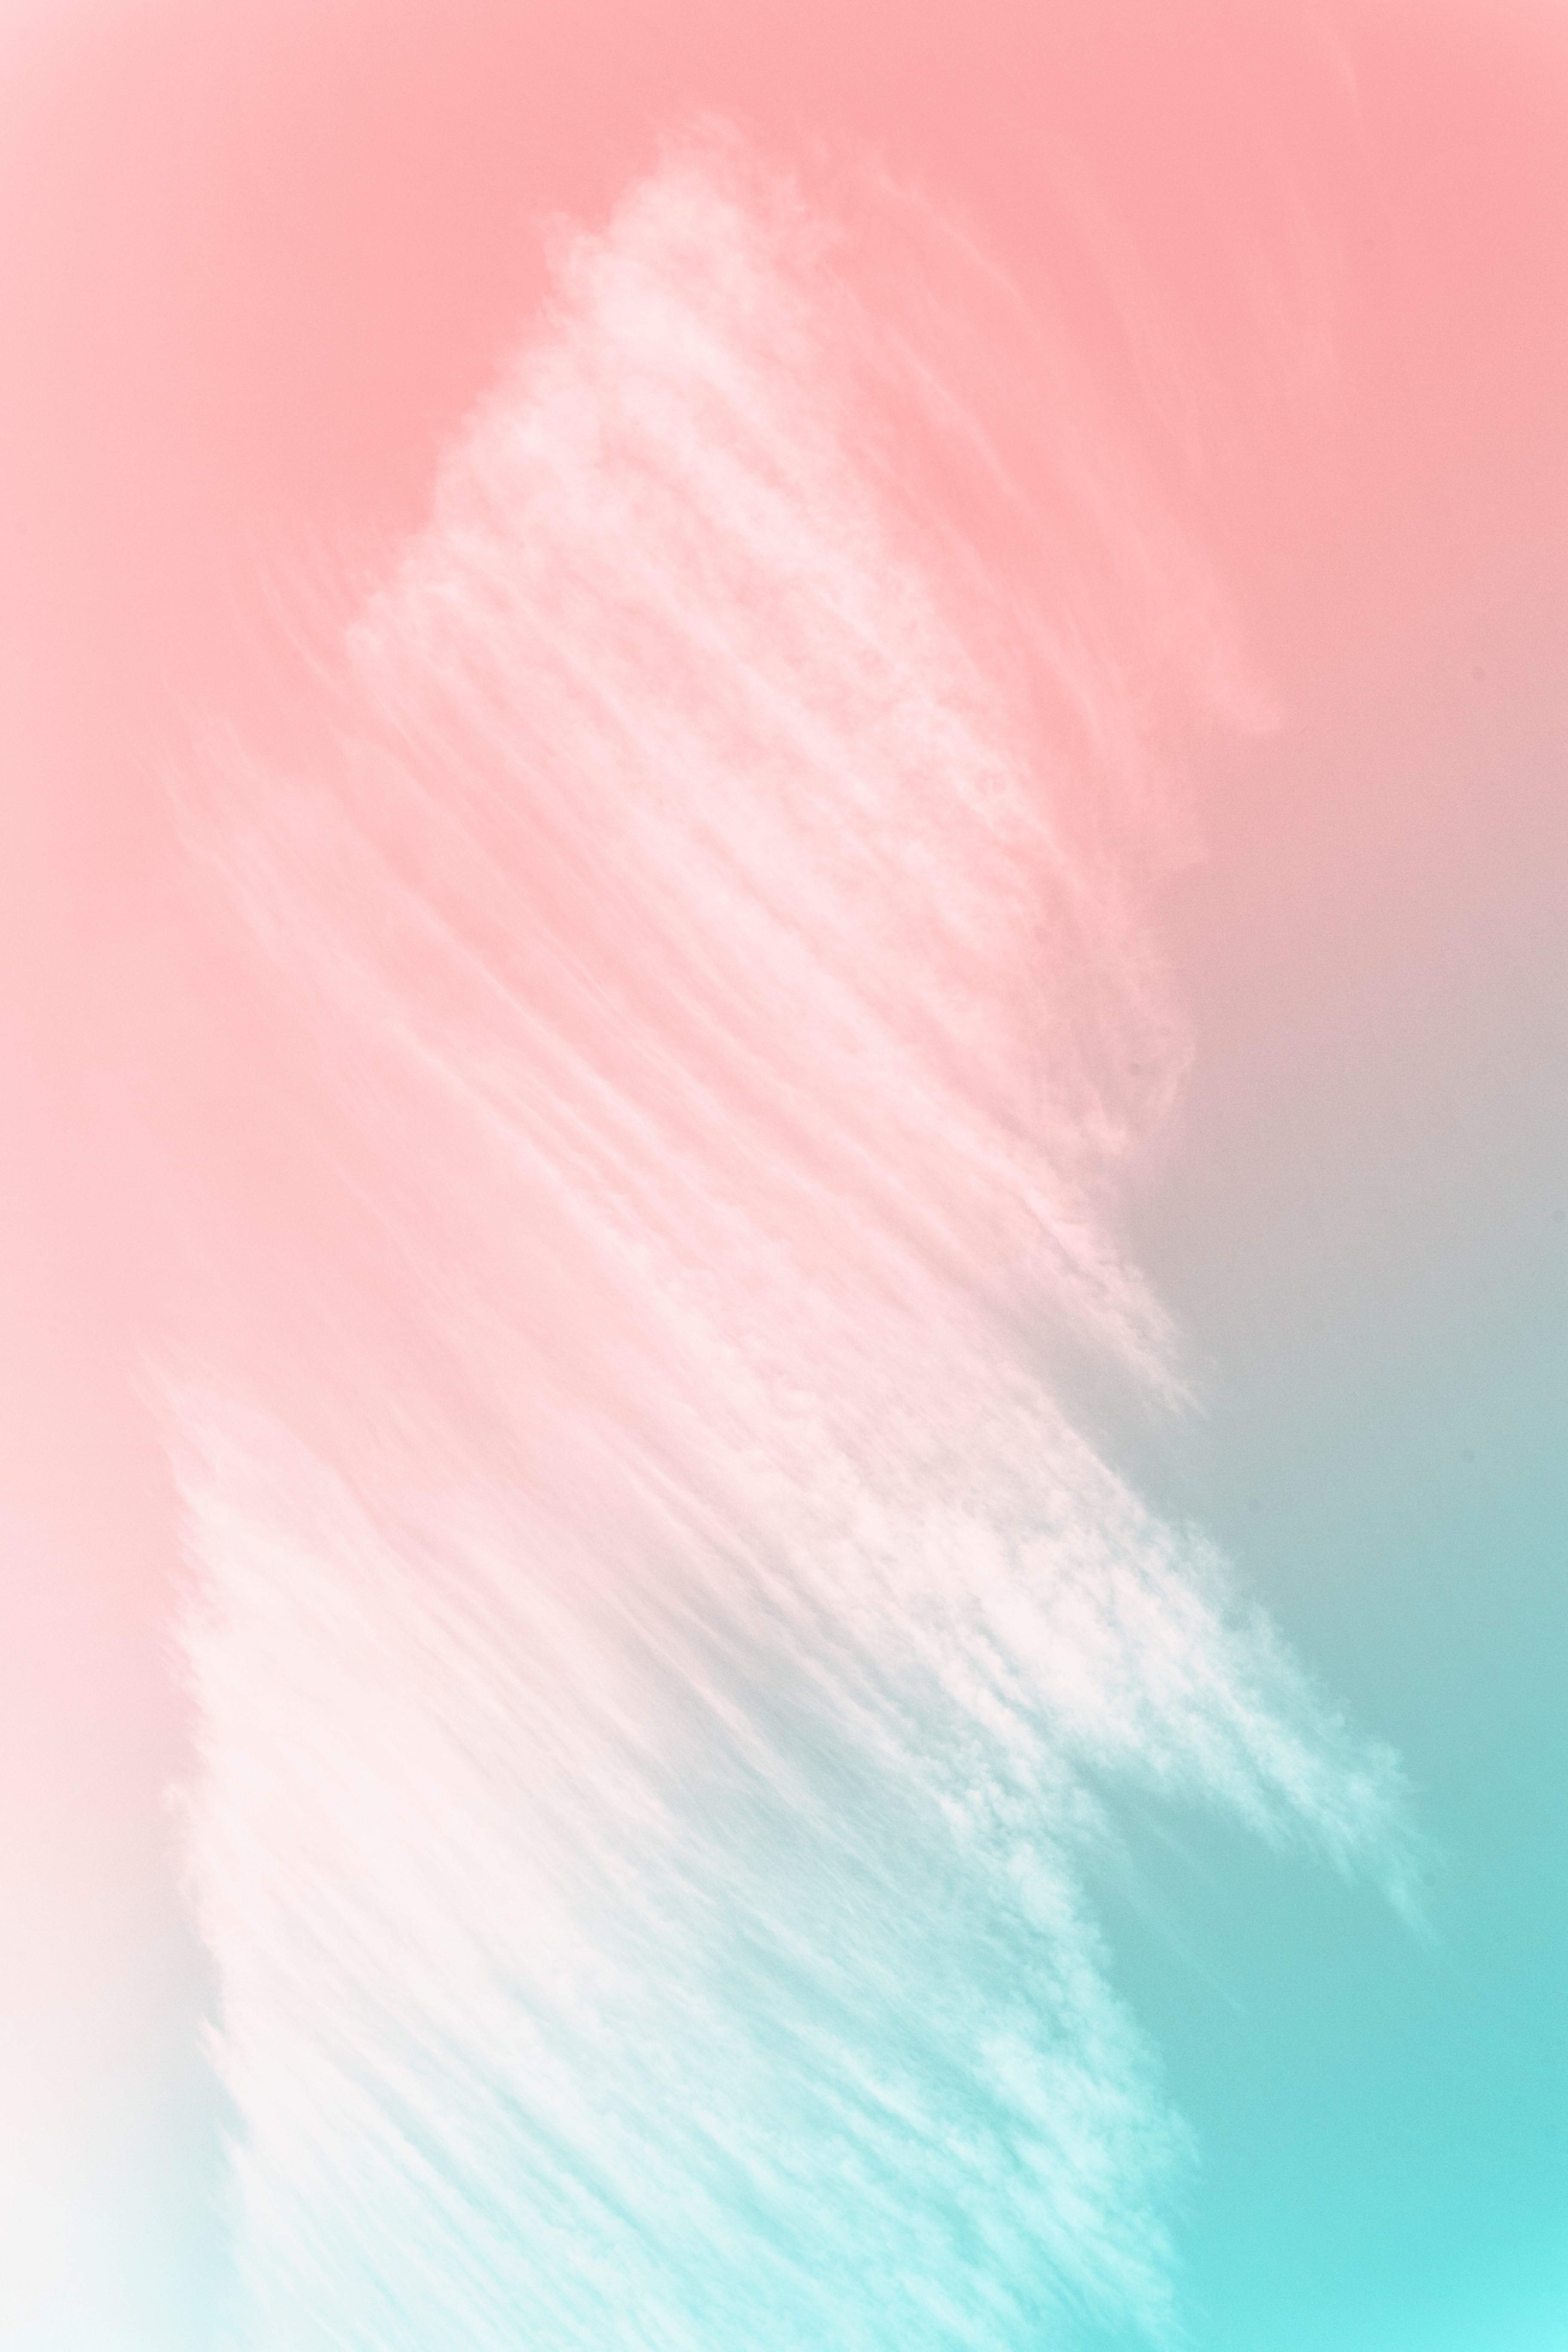 Pastel Wallpapers: Free HD Download [500+ HQ]